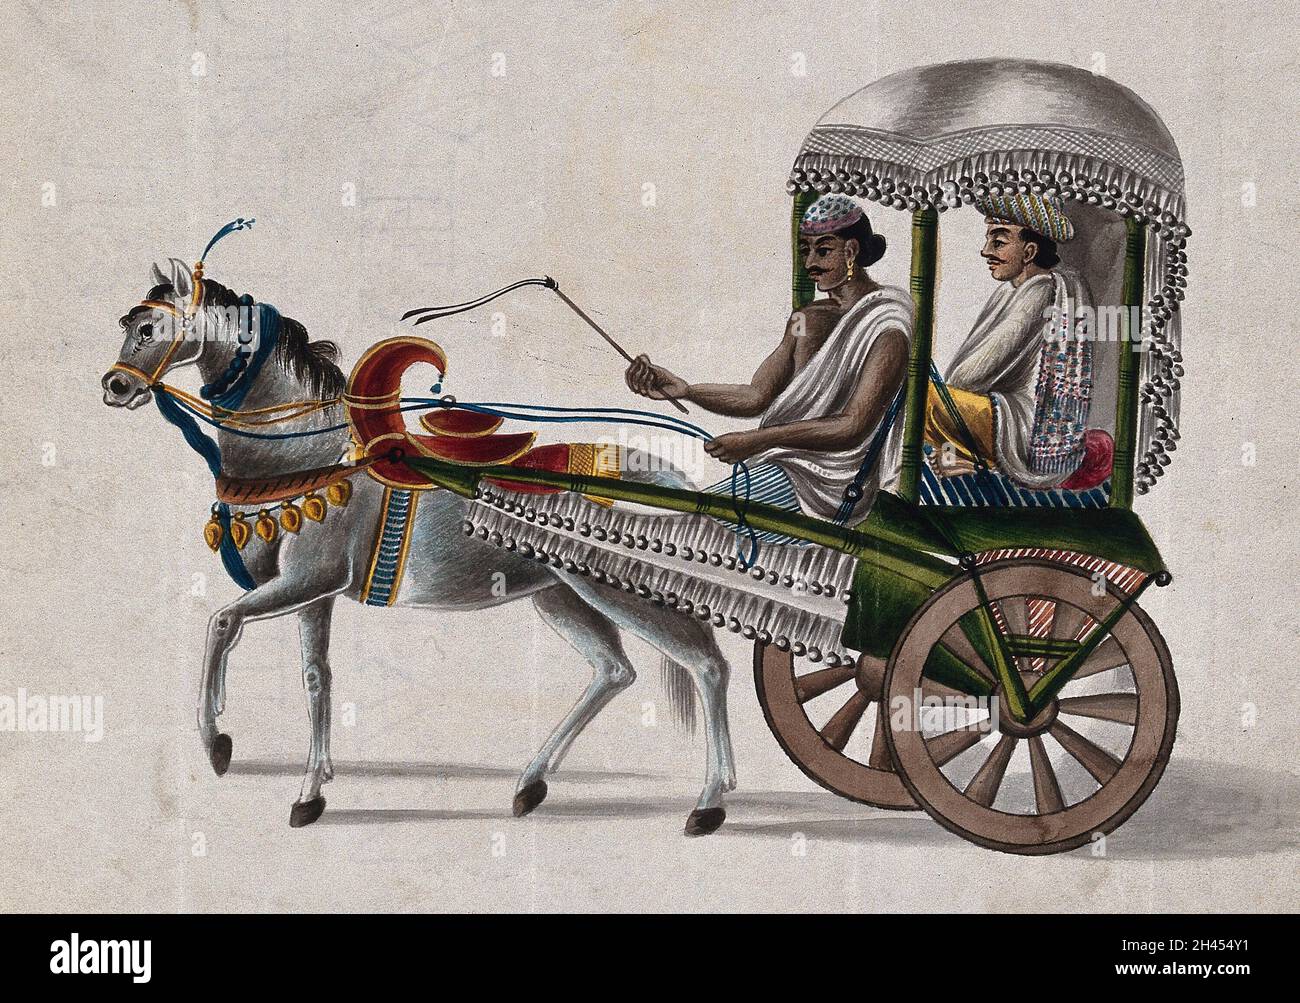 An Indian zamindar travelling in a small covered carriage pulled by a horse. Gouache painting by an Indian artist. Stock Photo